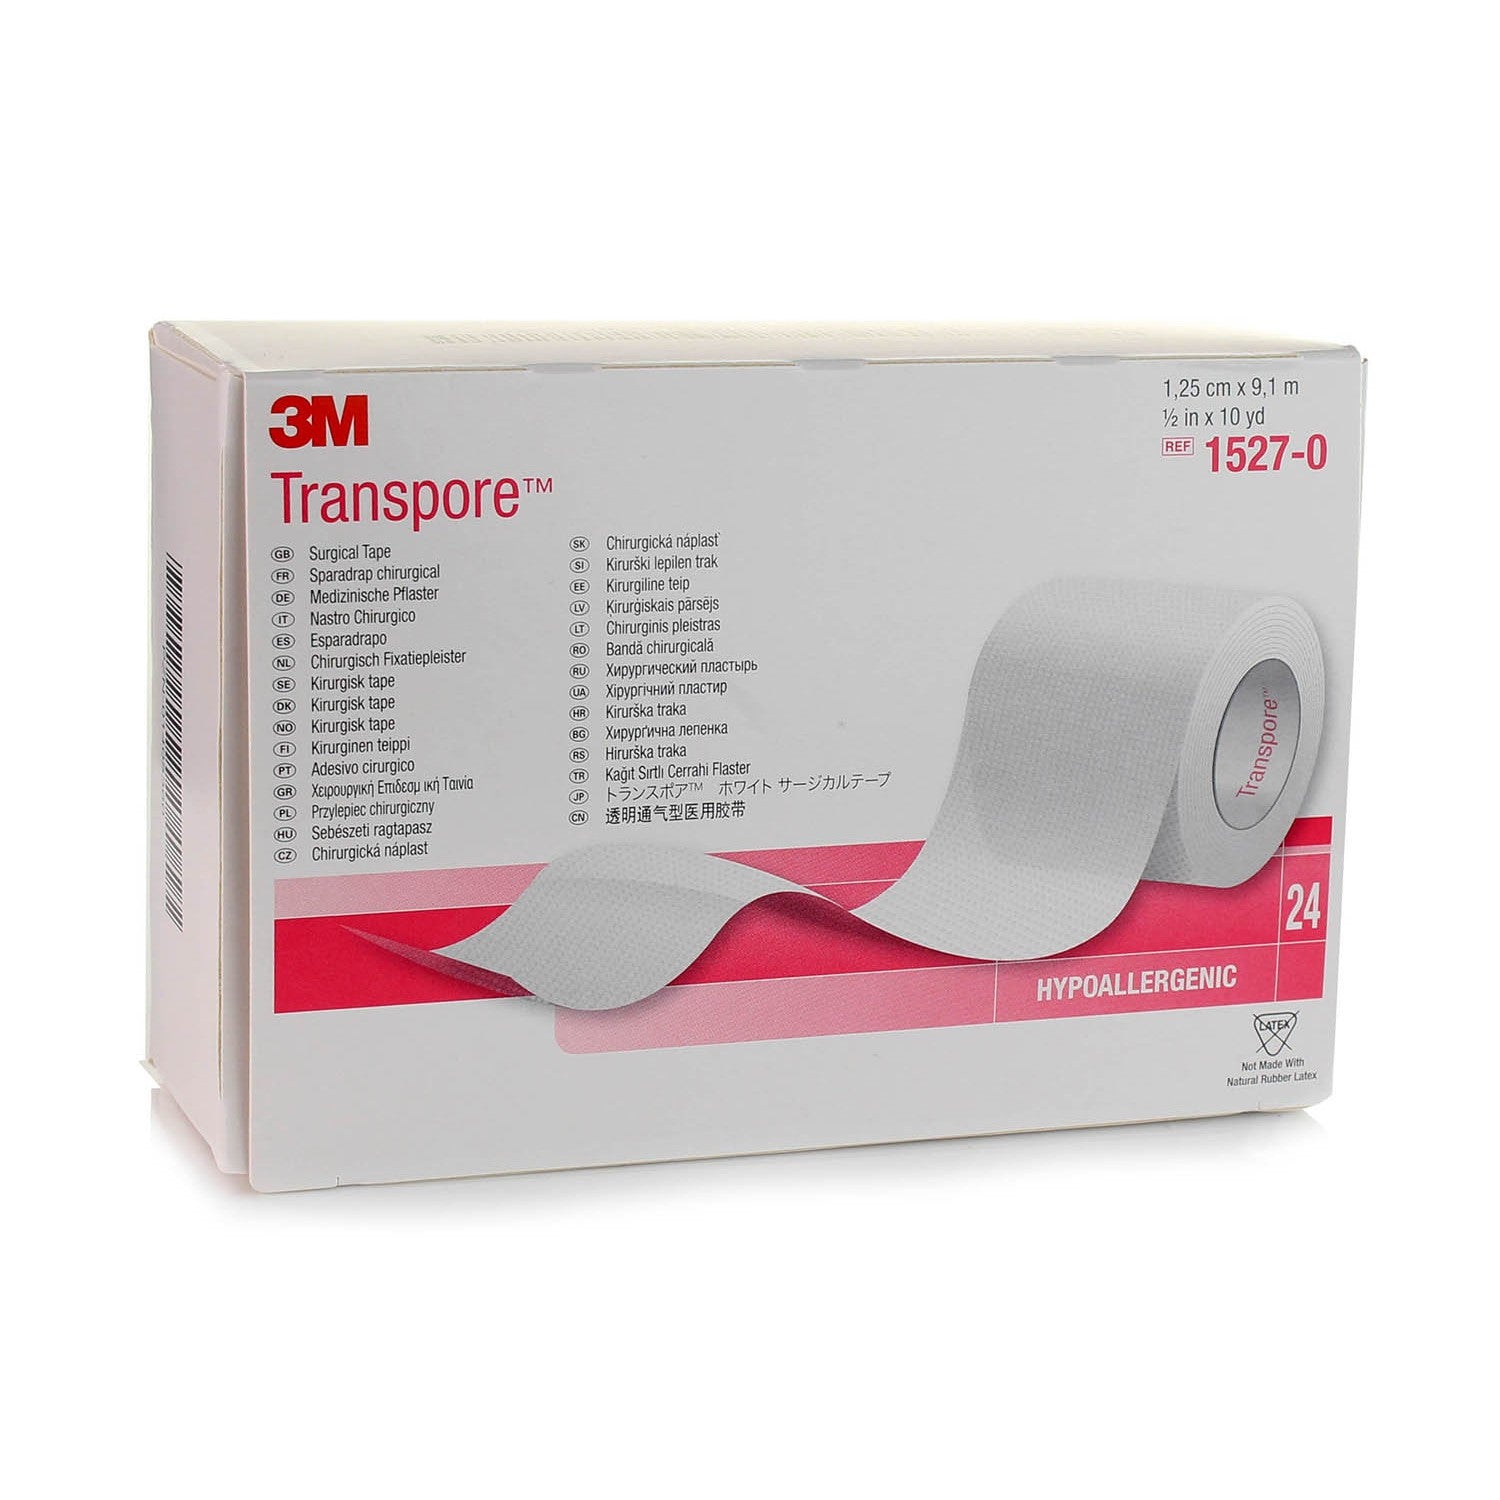 3M Micropore Paper Tape - White, 1 X 10Yds (Box of 12)(Pack of 2)